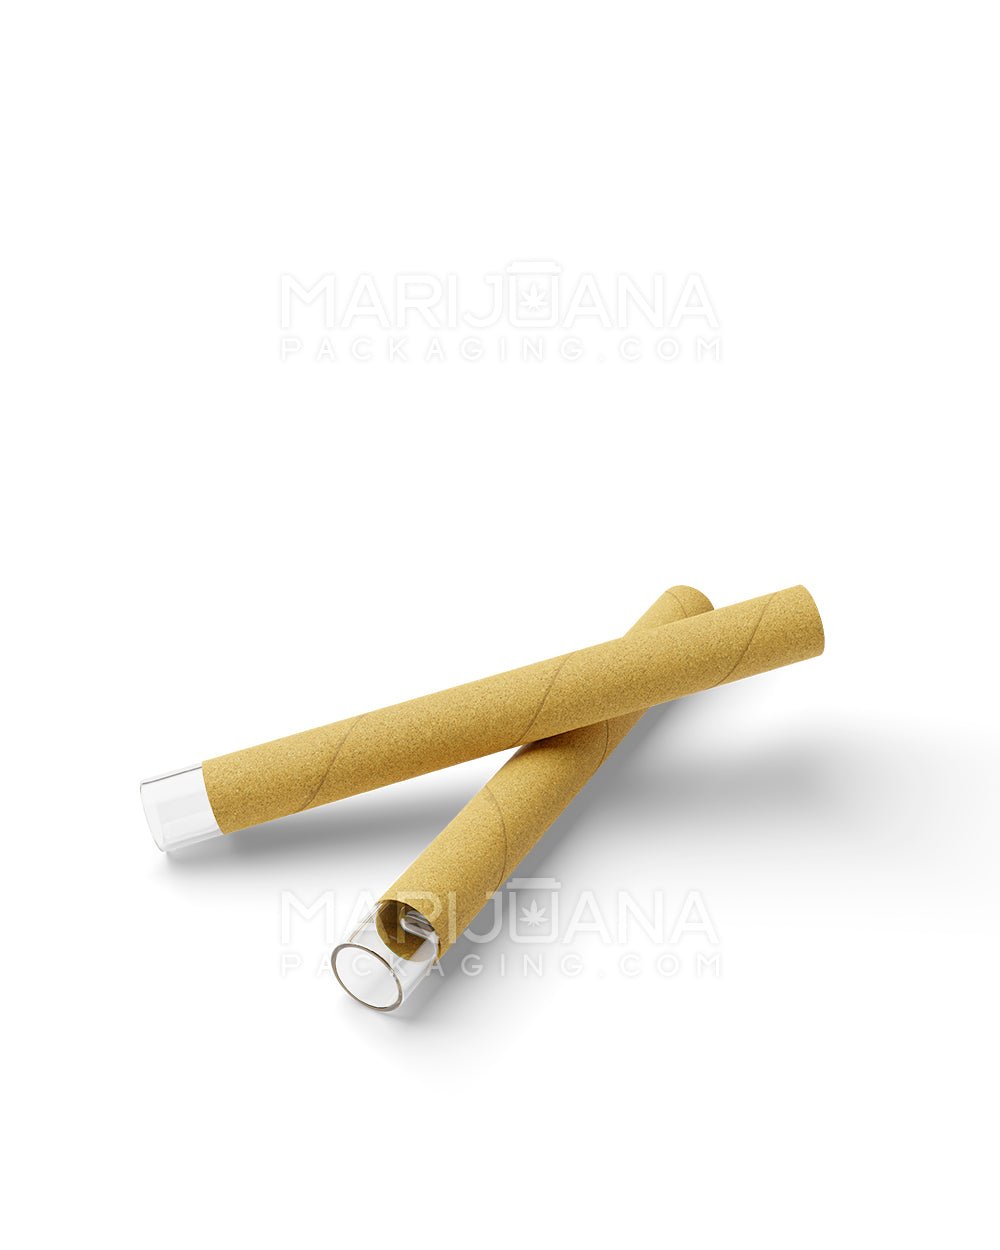 CROP KINGZ | King Size Glass Tipped Pre-Rolled Blunt Cones | 109mm - Organic Hemp - 110 Count - 2